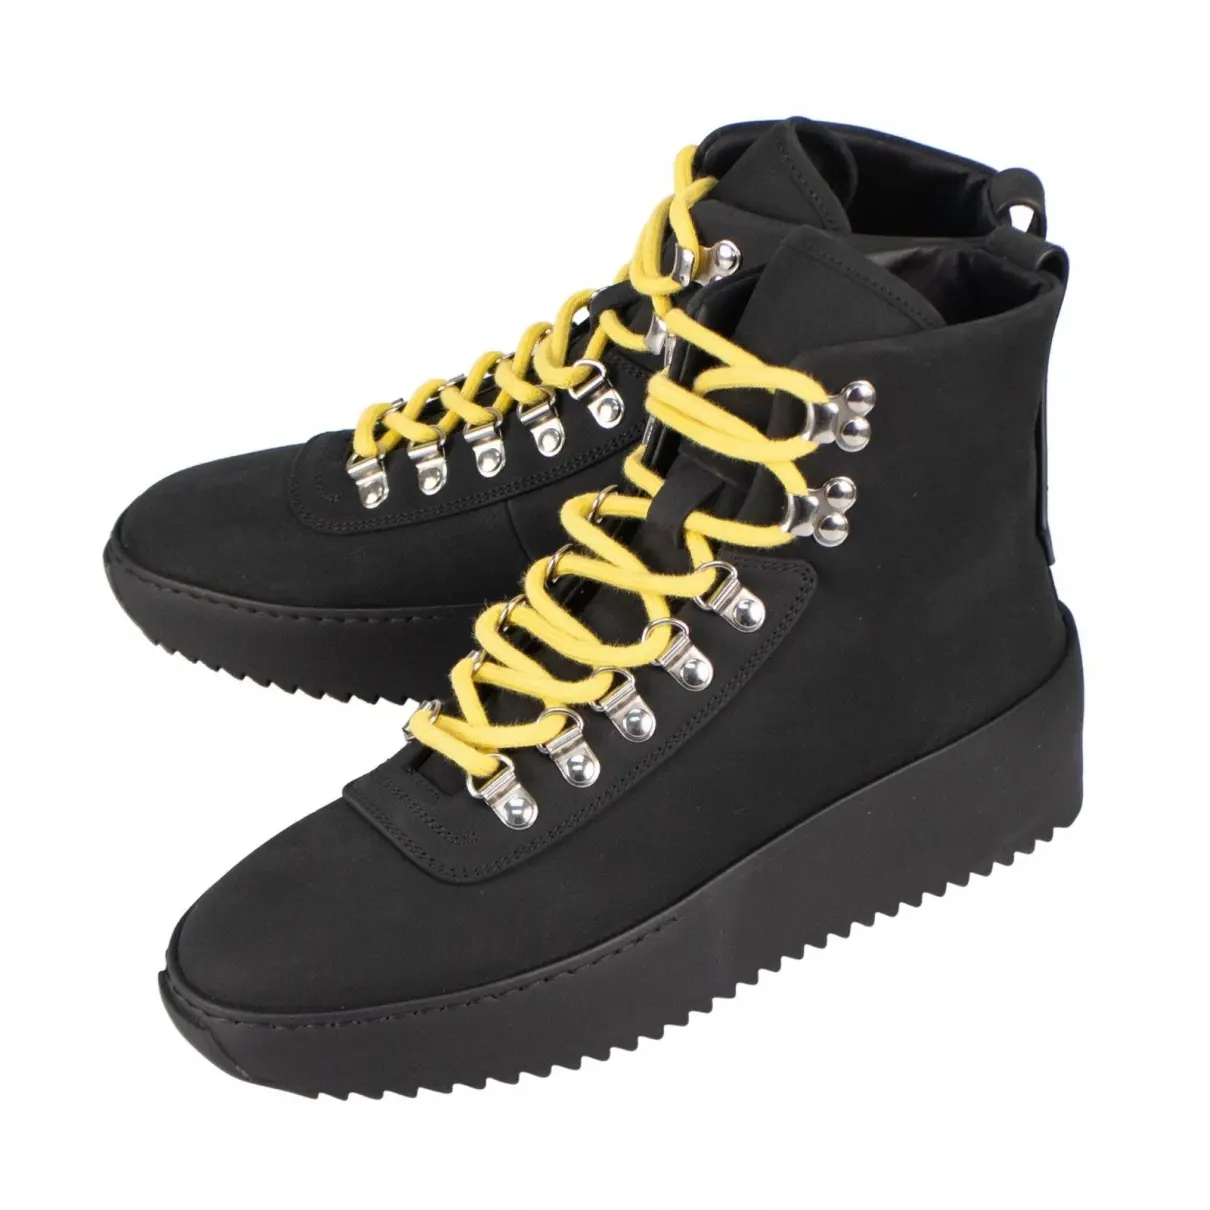 Fear of God Leather trainers for sale